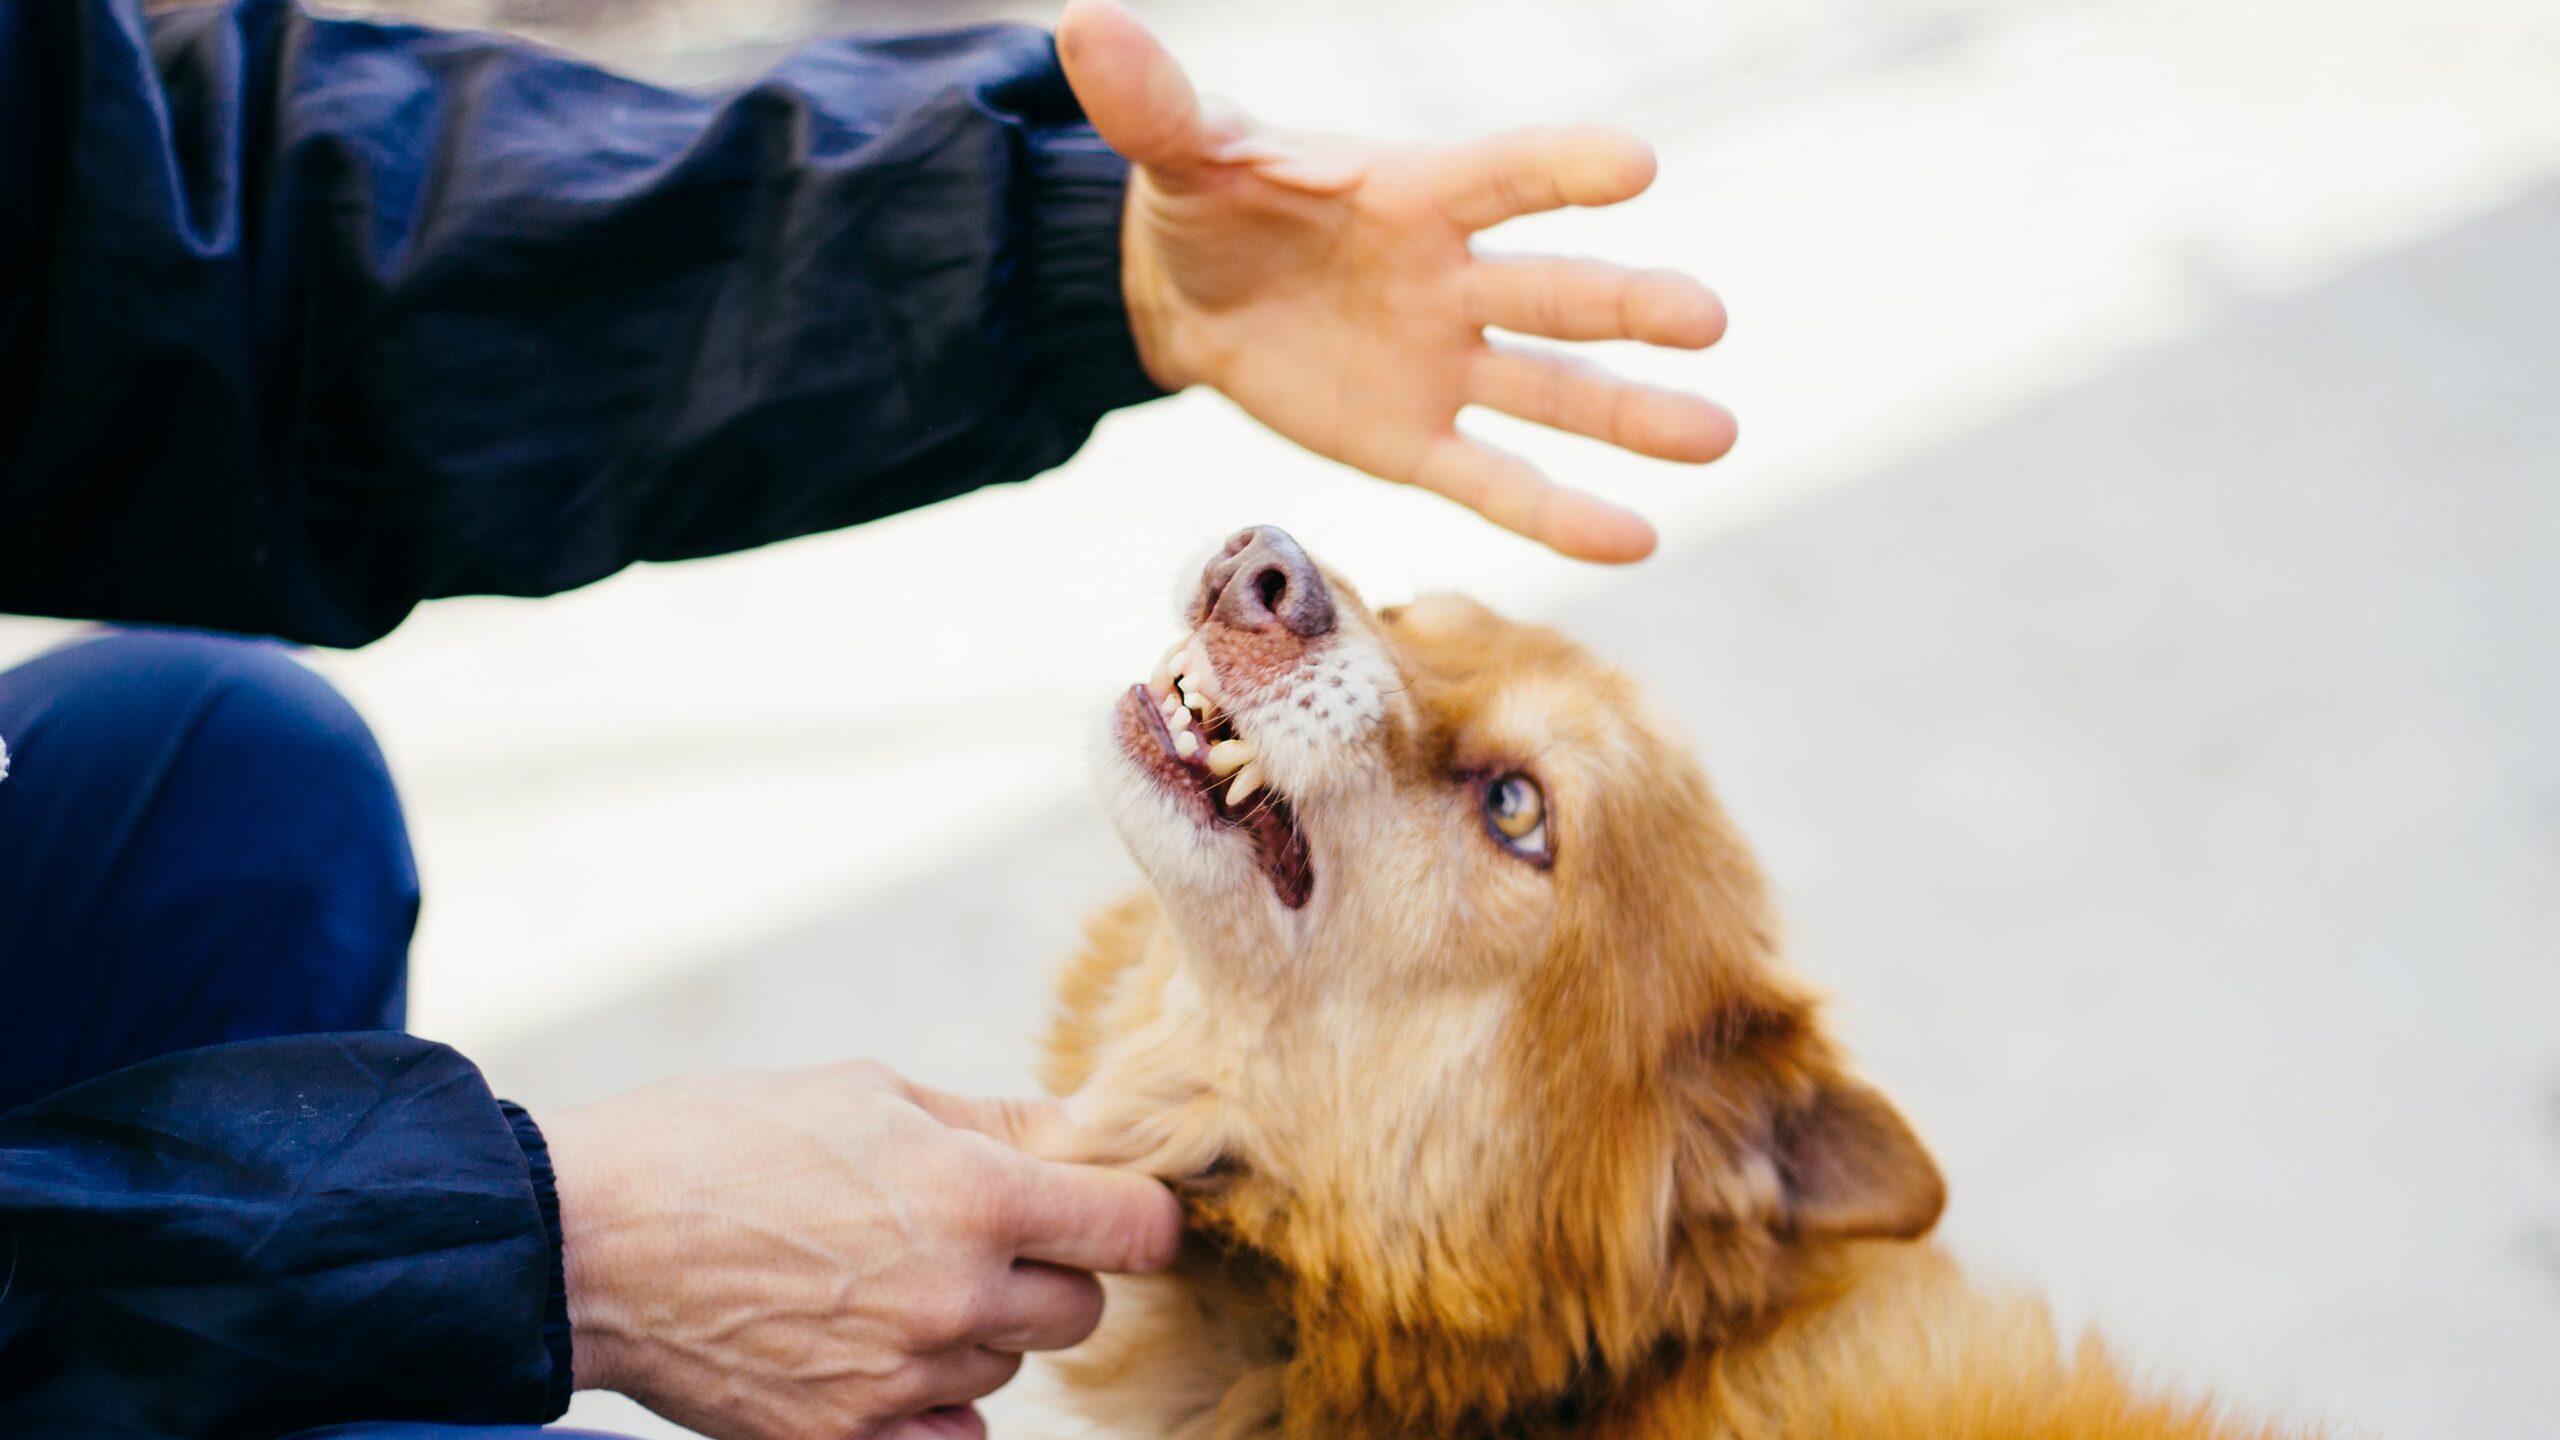 How do I stop my dog from biting guests?